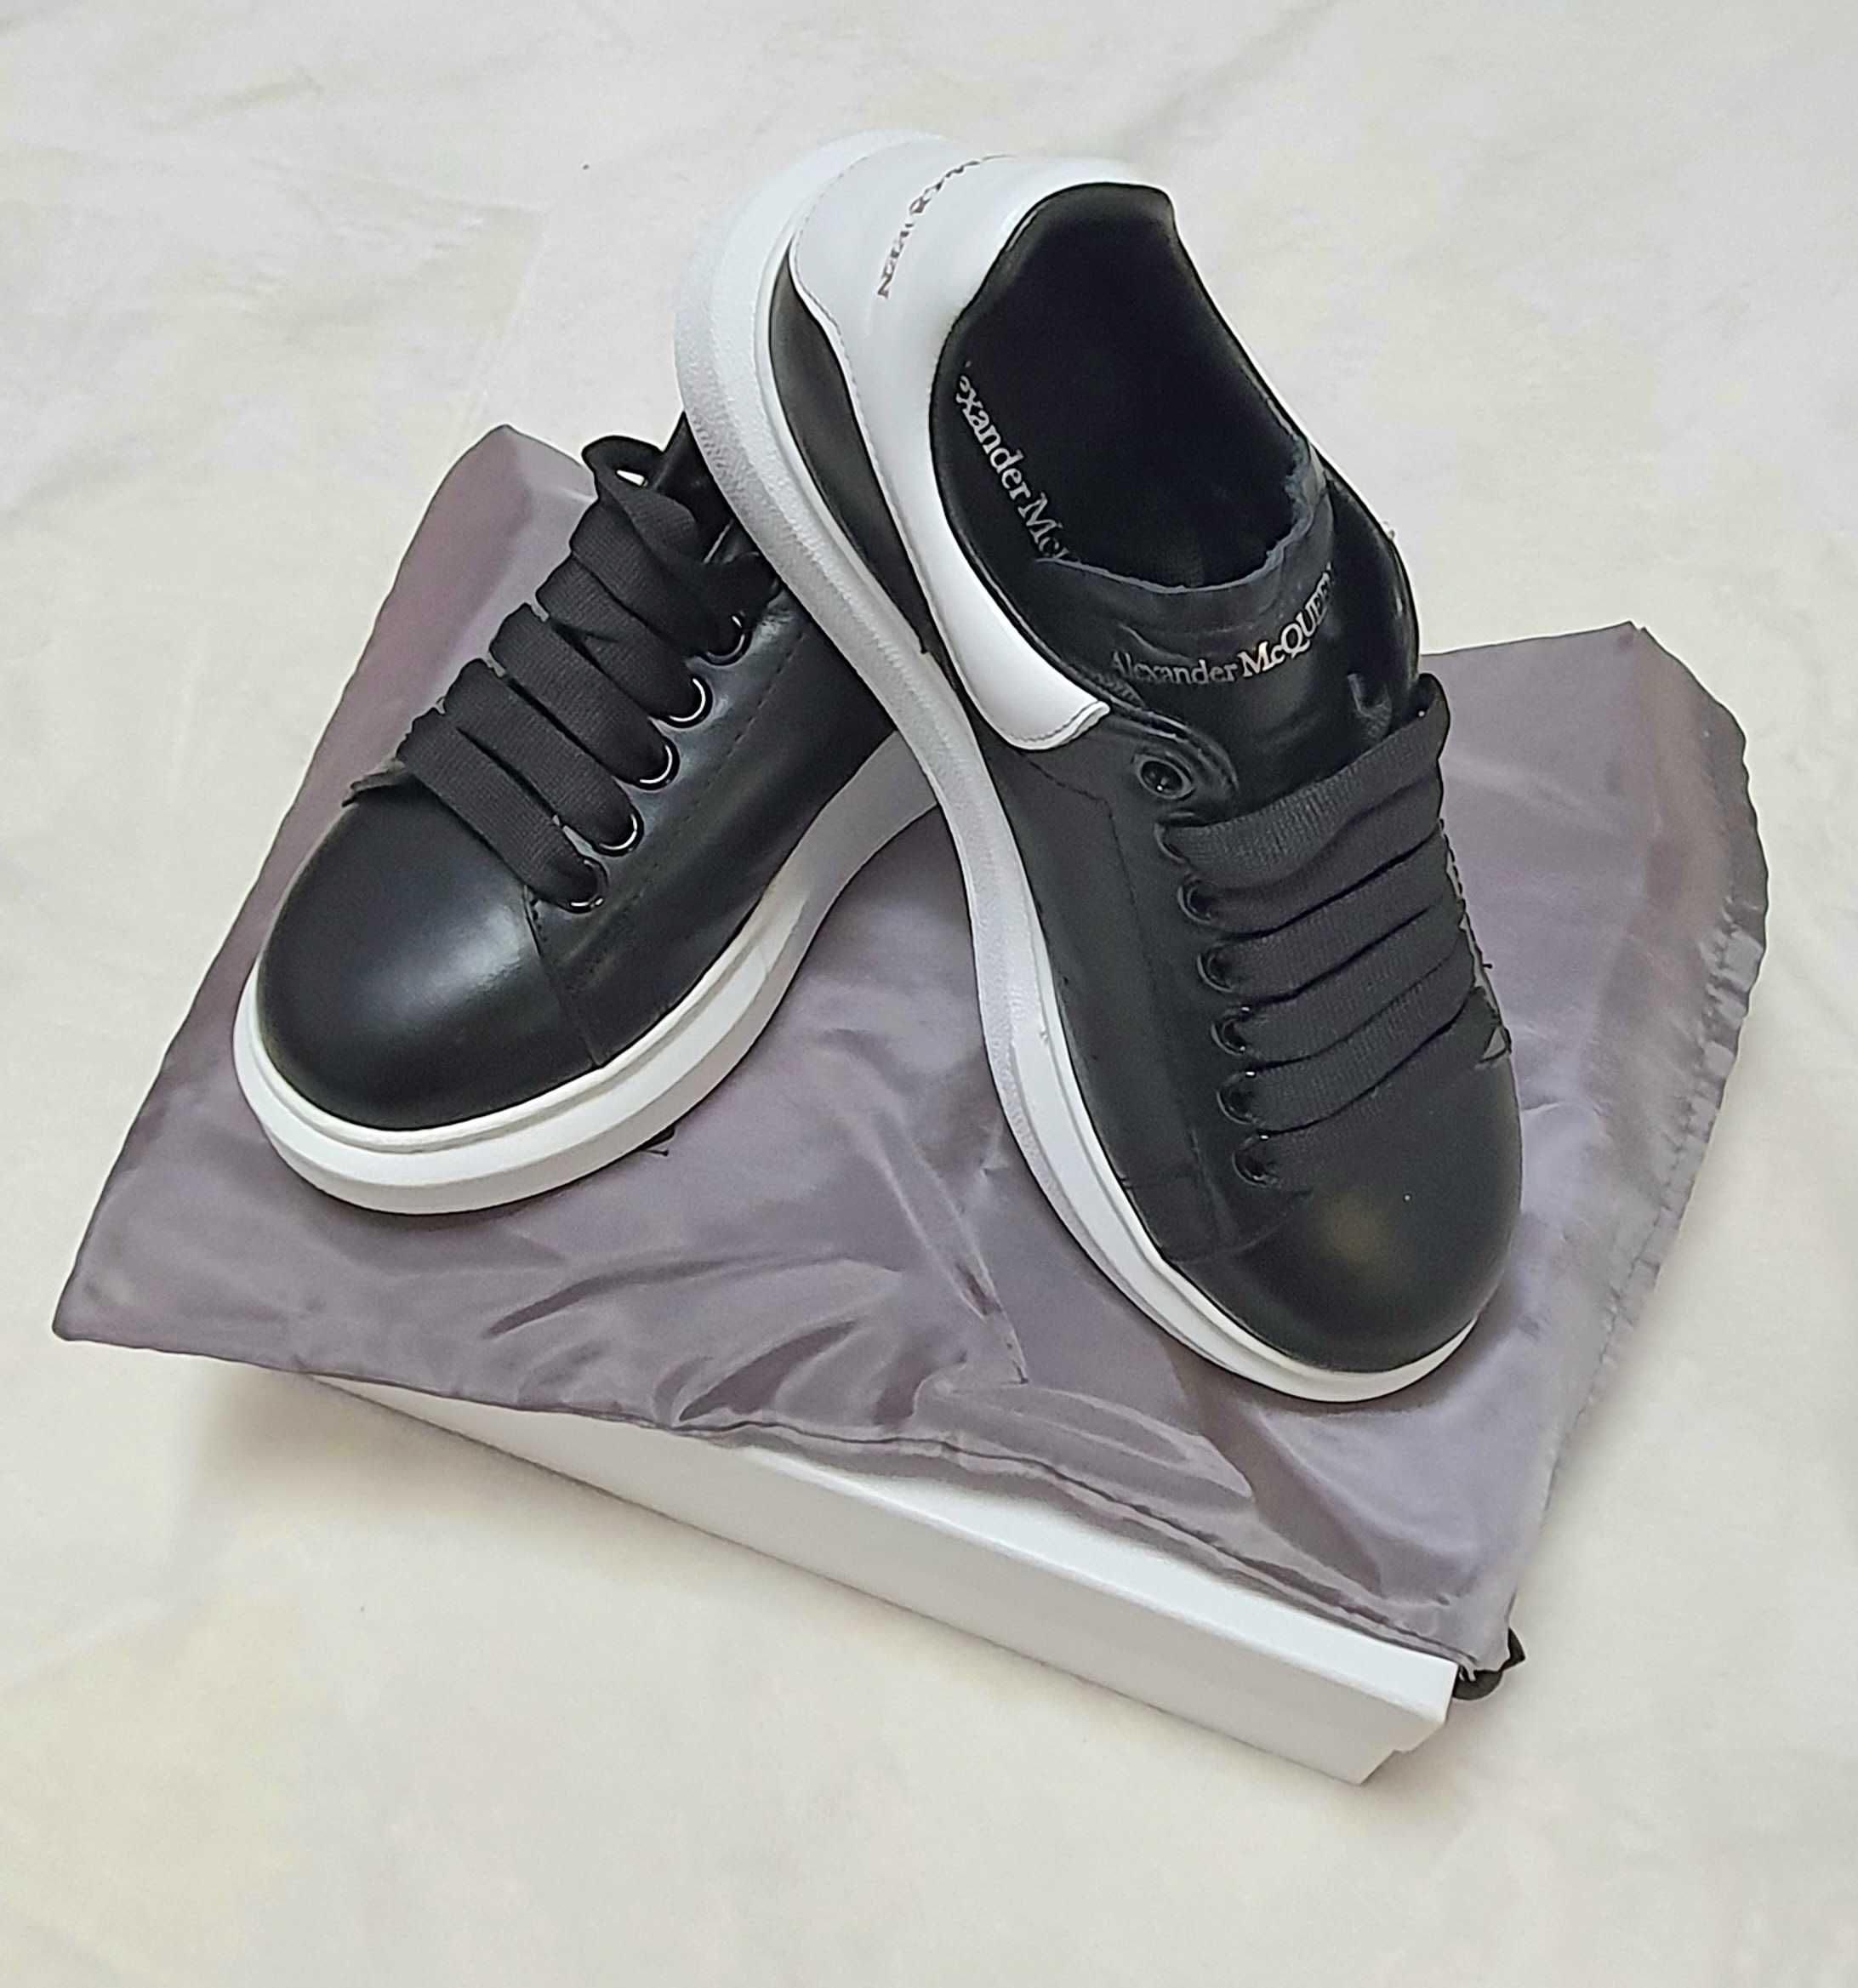 Sneakers Alexander Mcqueen black and white